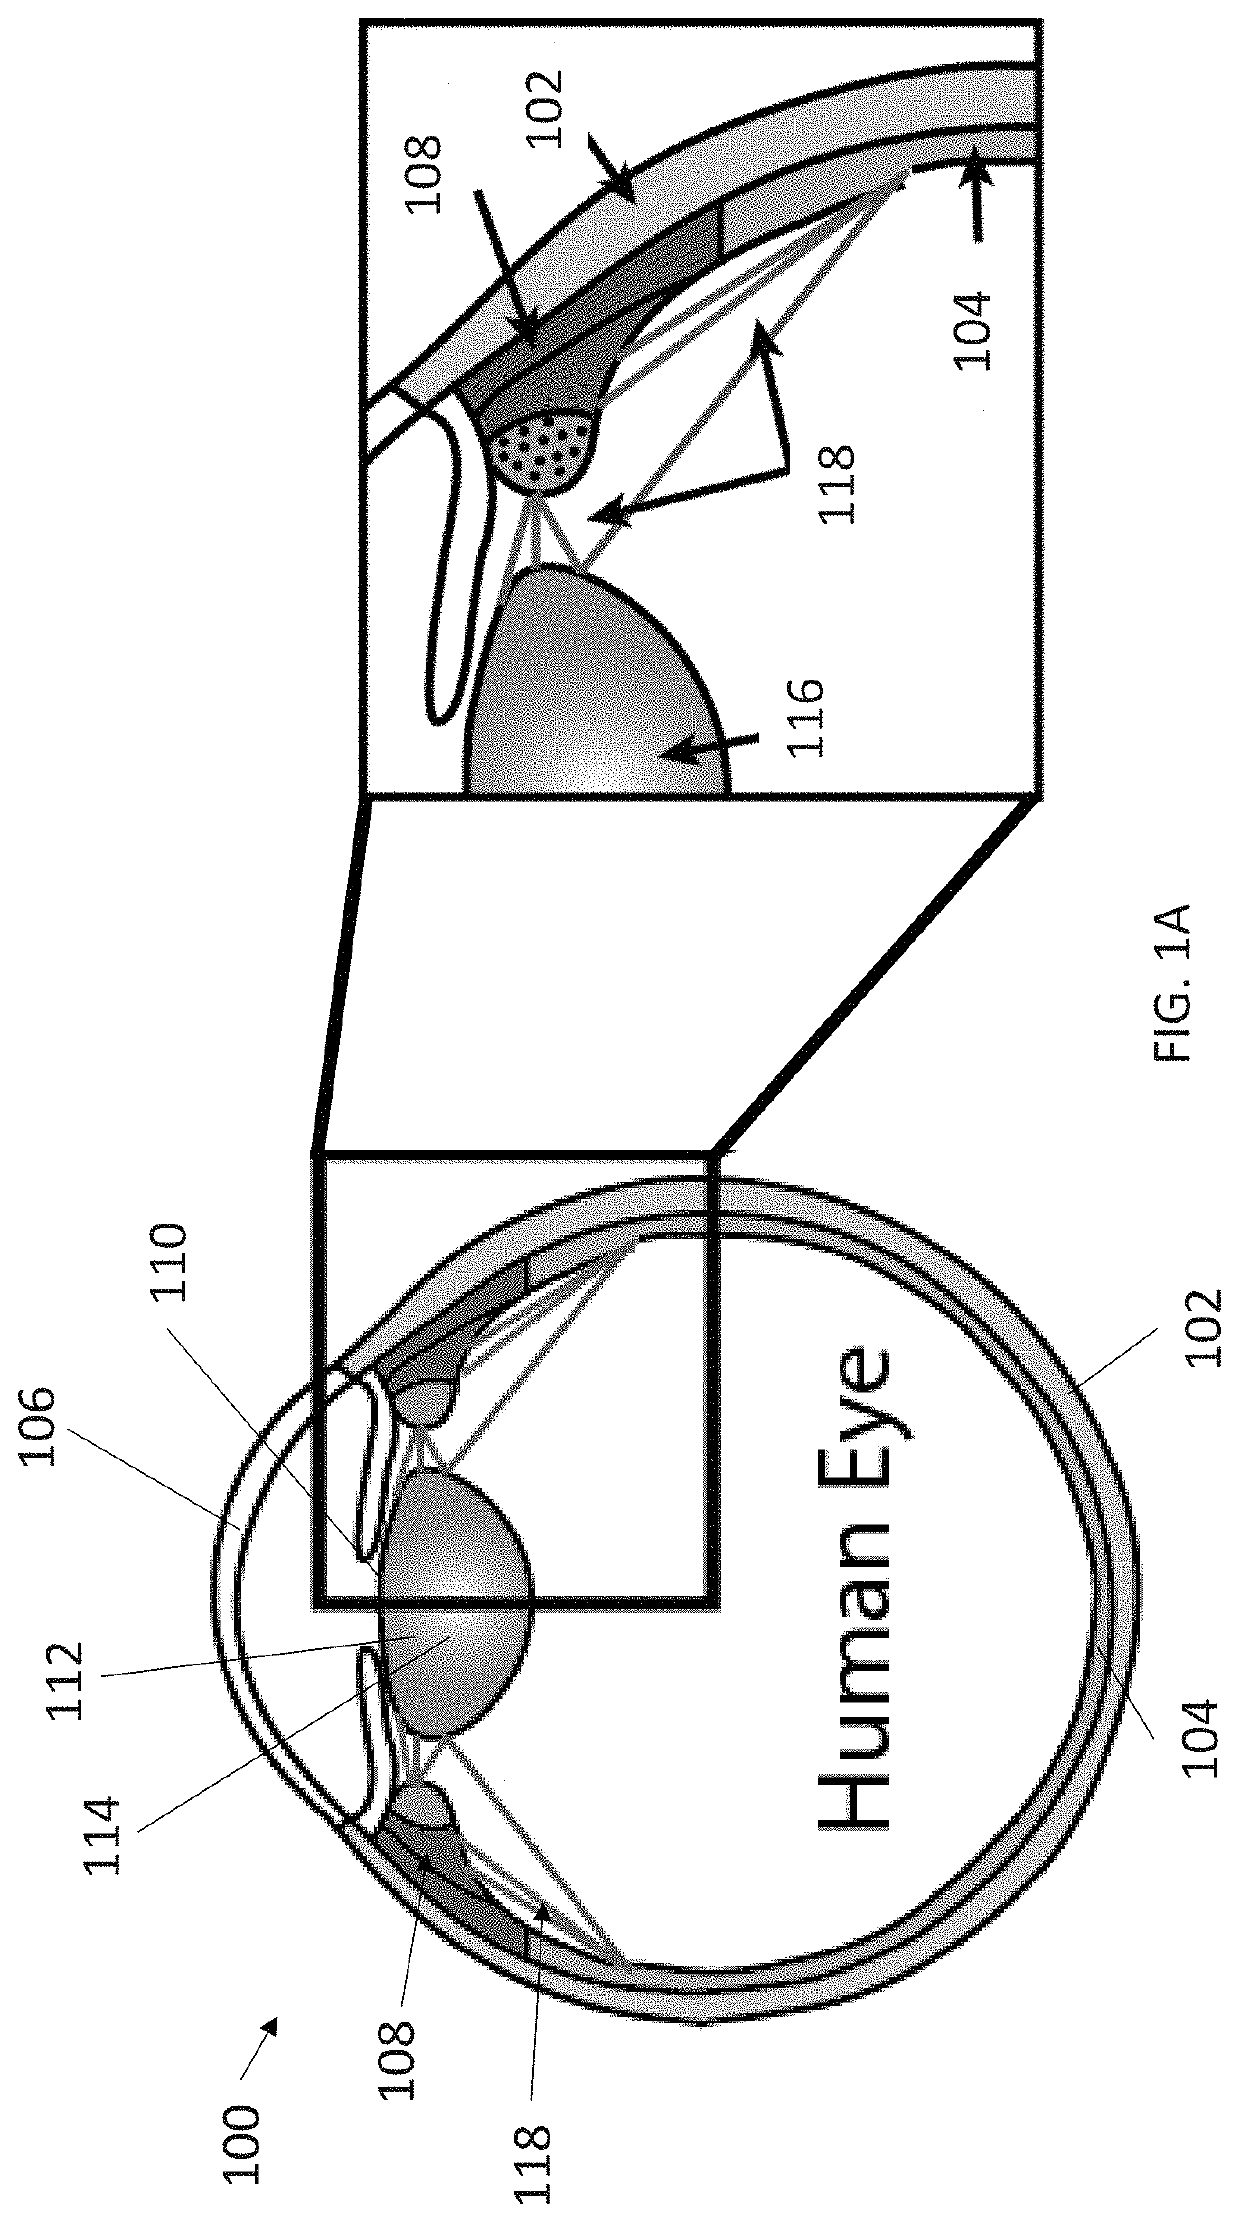 3-dimensional model creation using whole eye finite element modeling of human ocular structures